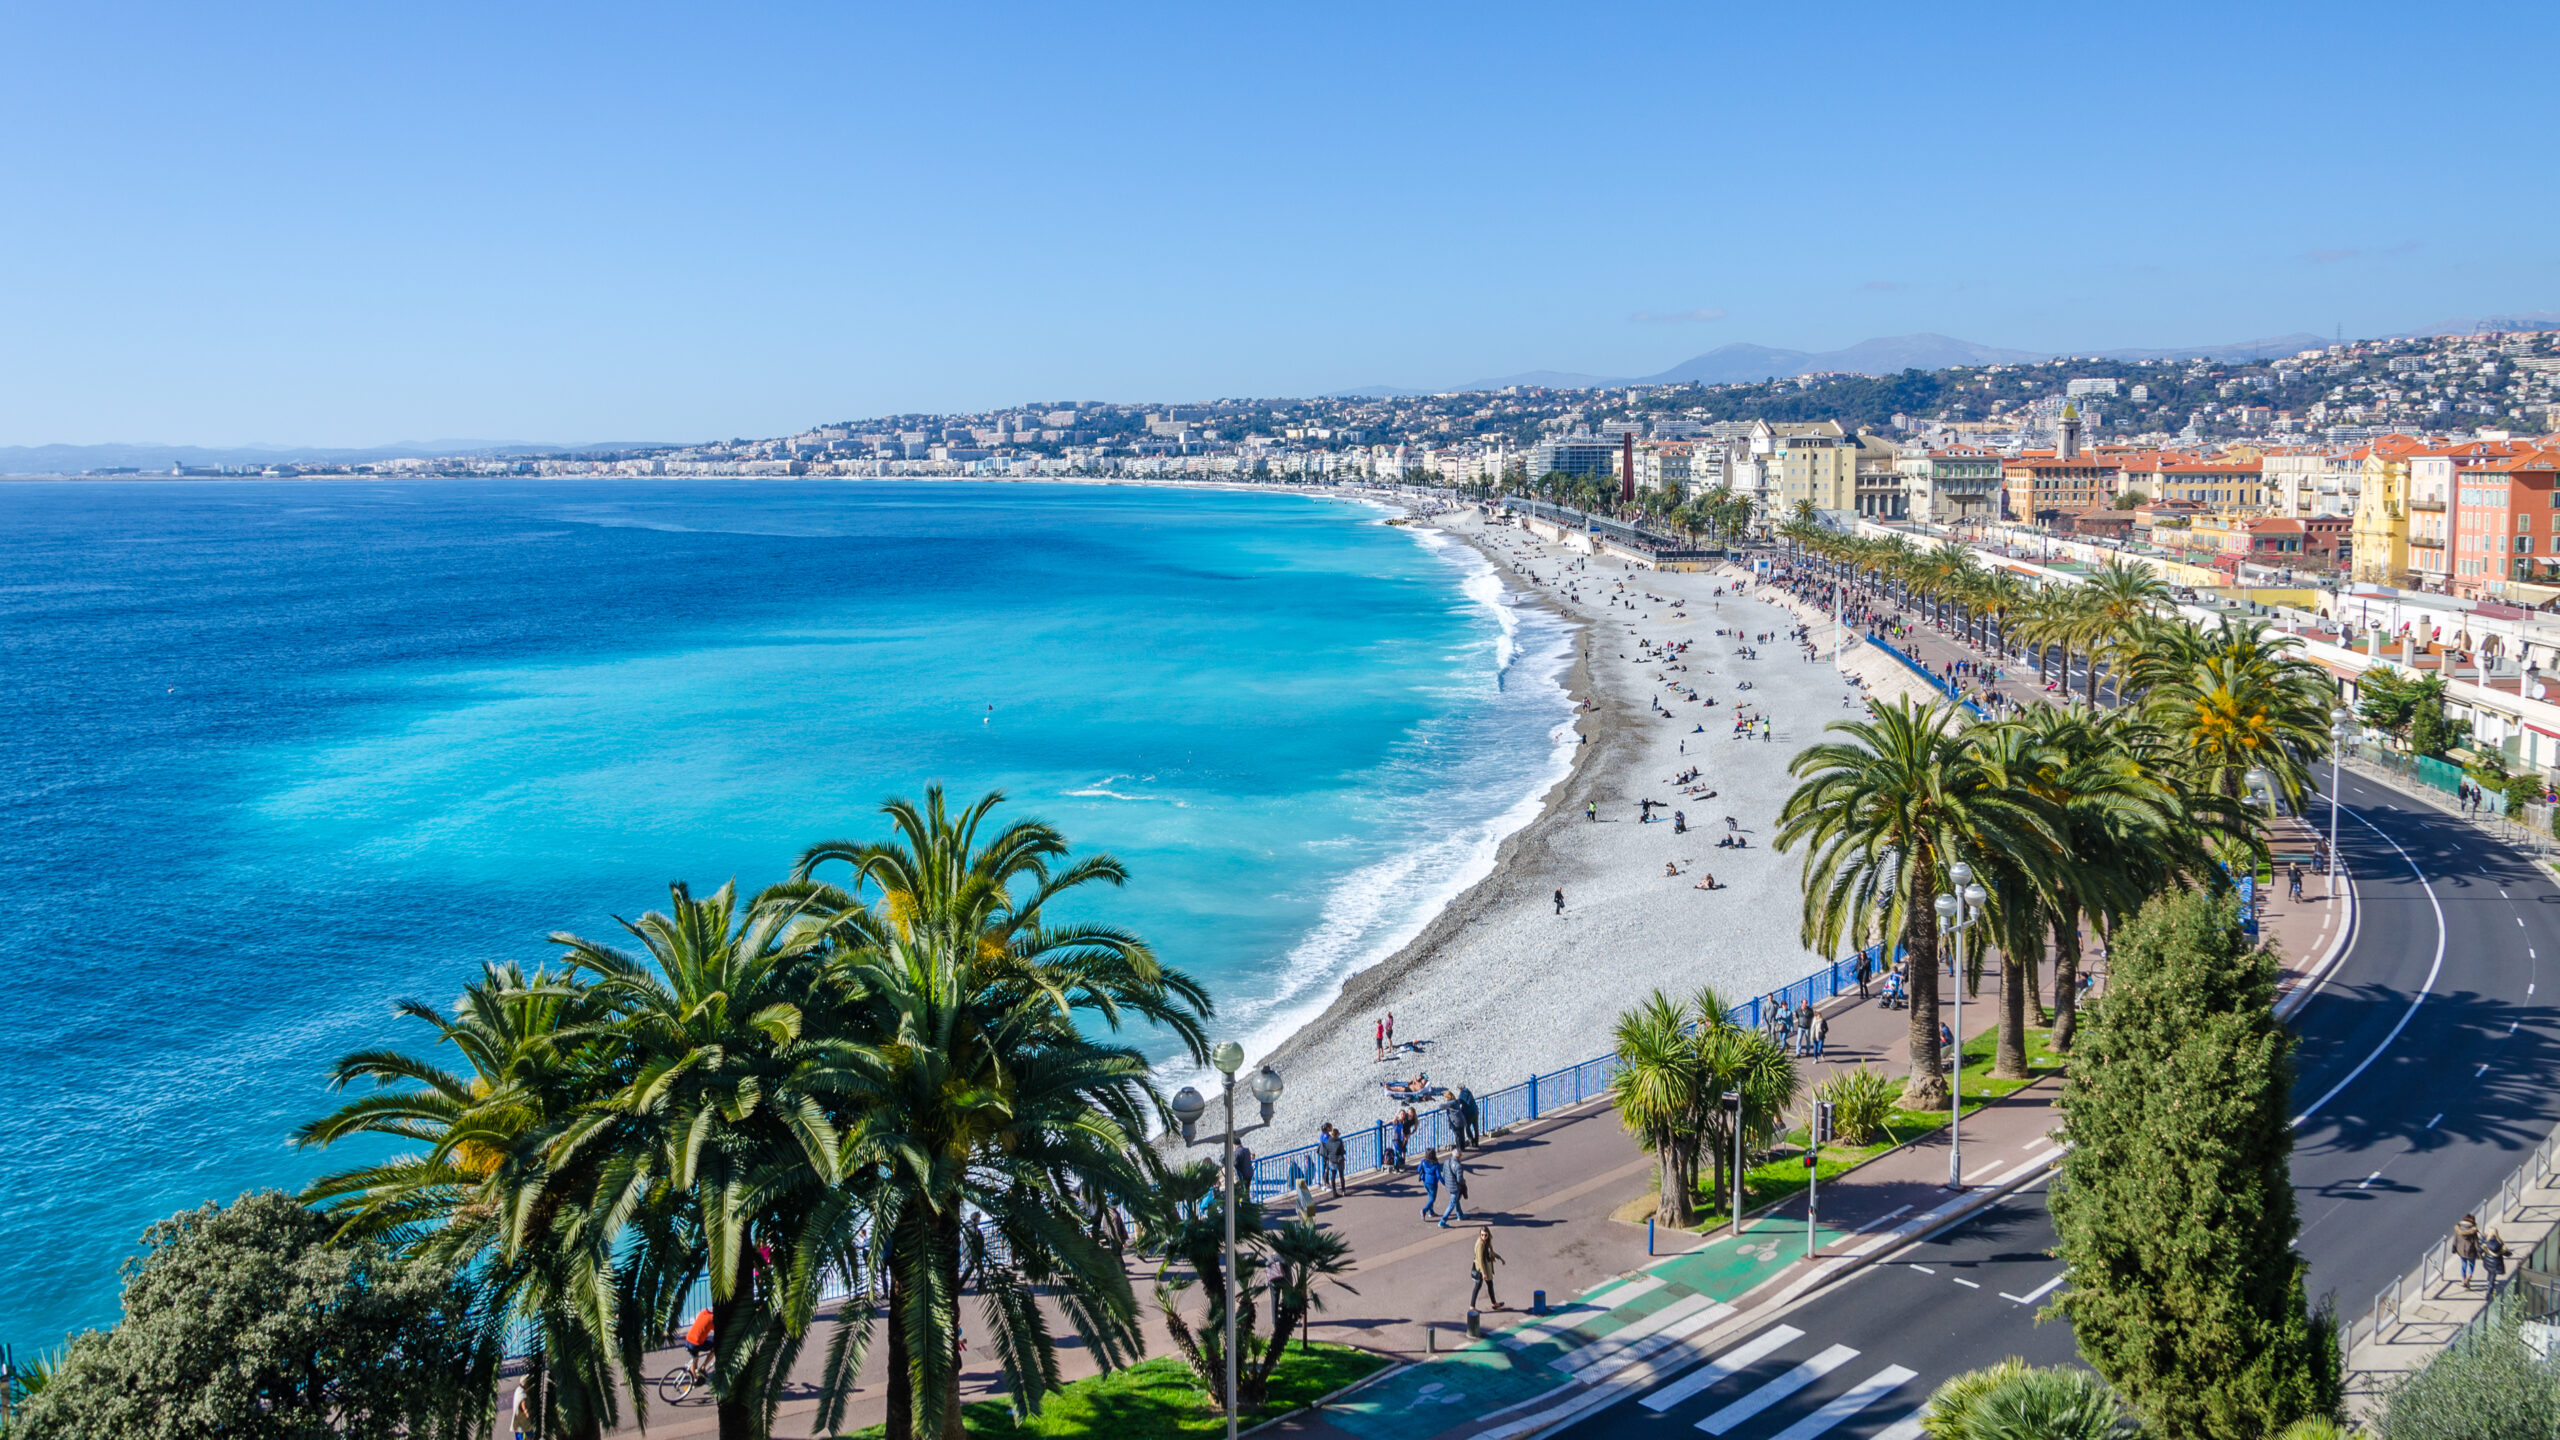 View of Nice from above with blue water on the left and a long boulevard on the right